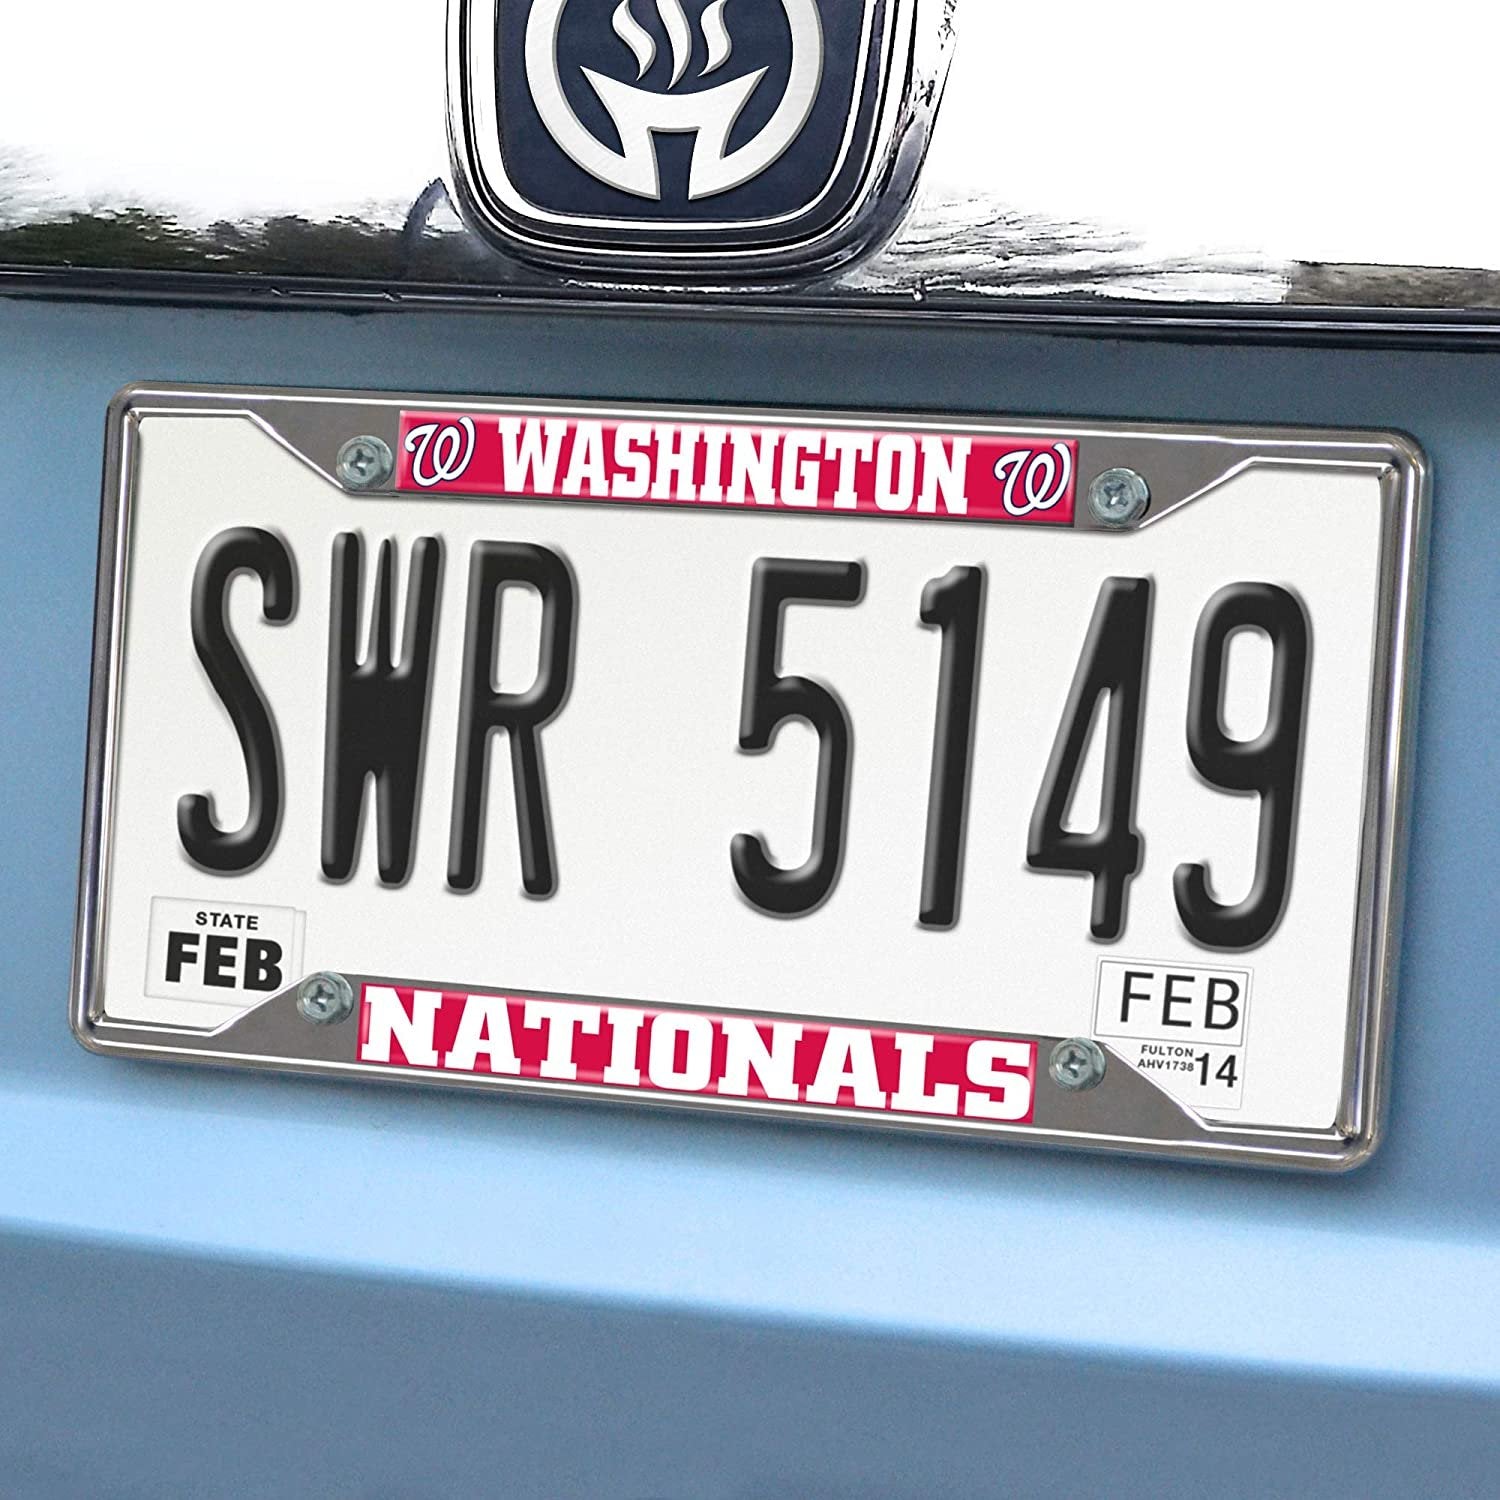 Washington Nationals Chrome Metal License Plate Frame Tag Cover 12x6 Inches